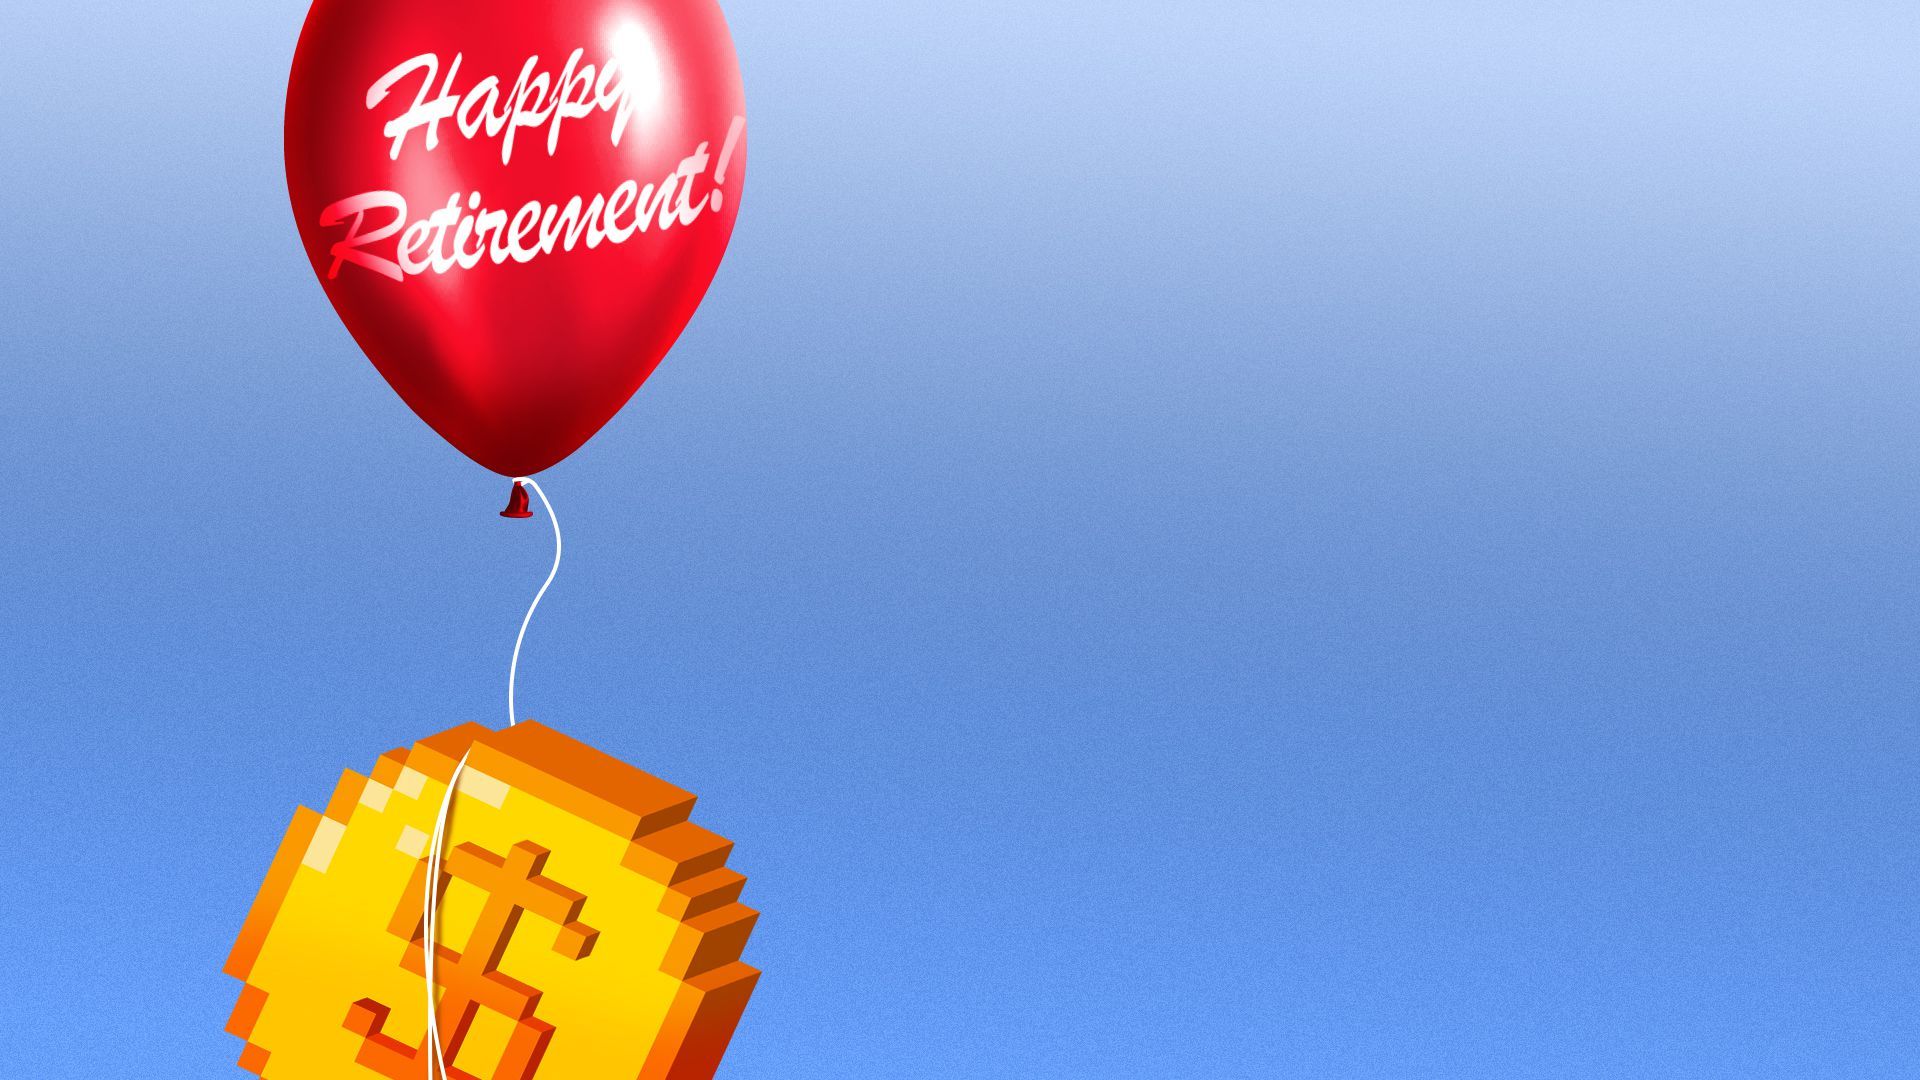 Illustration of an 8-bit gold coin attached to a balloon that reads "Happy Retirement!"